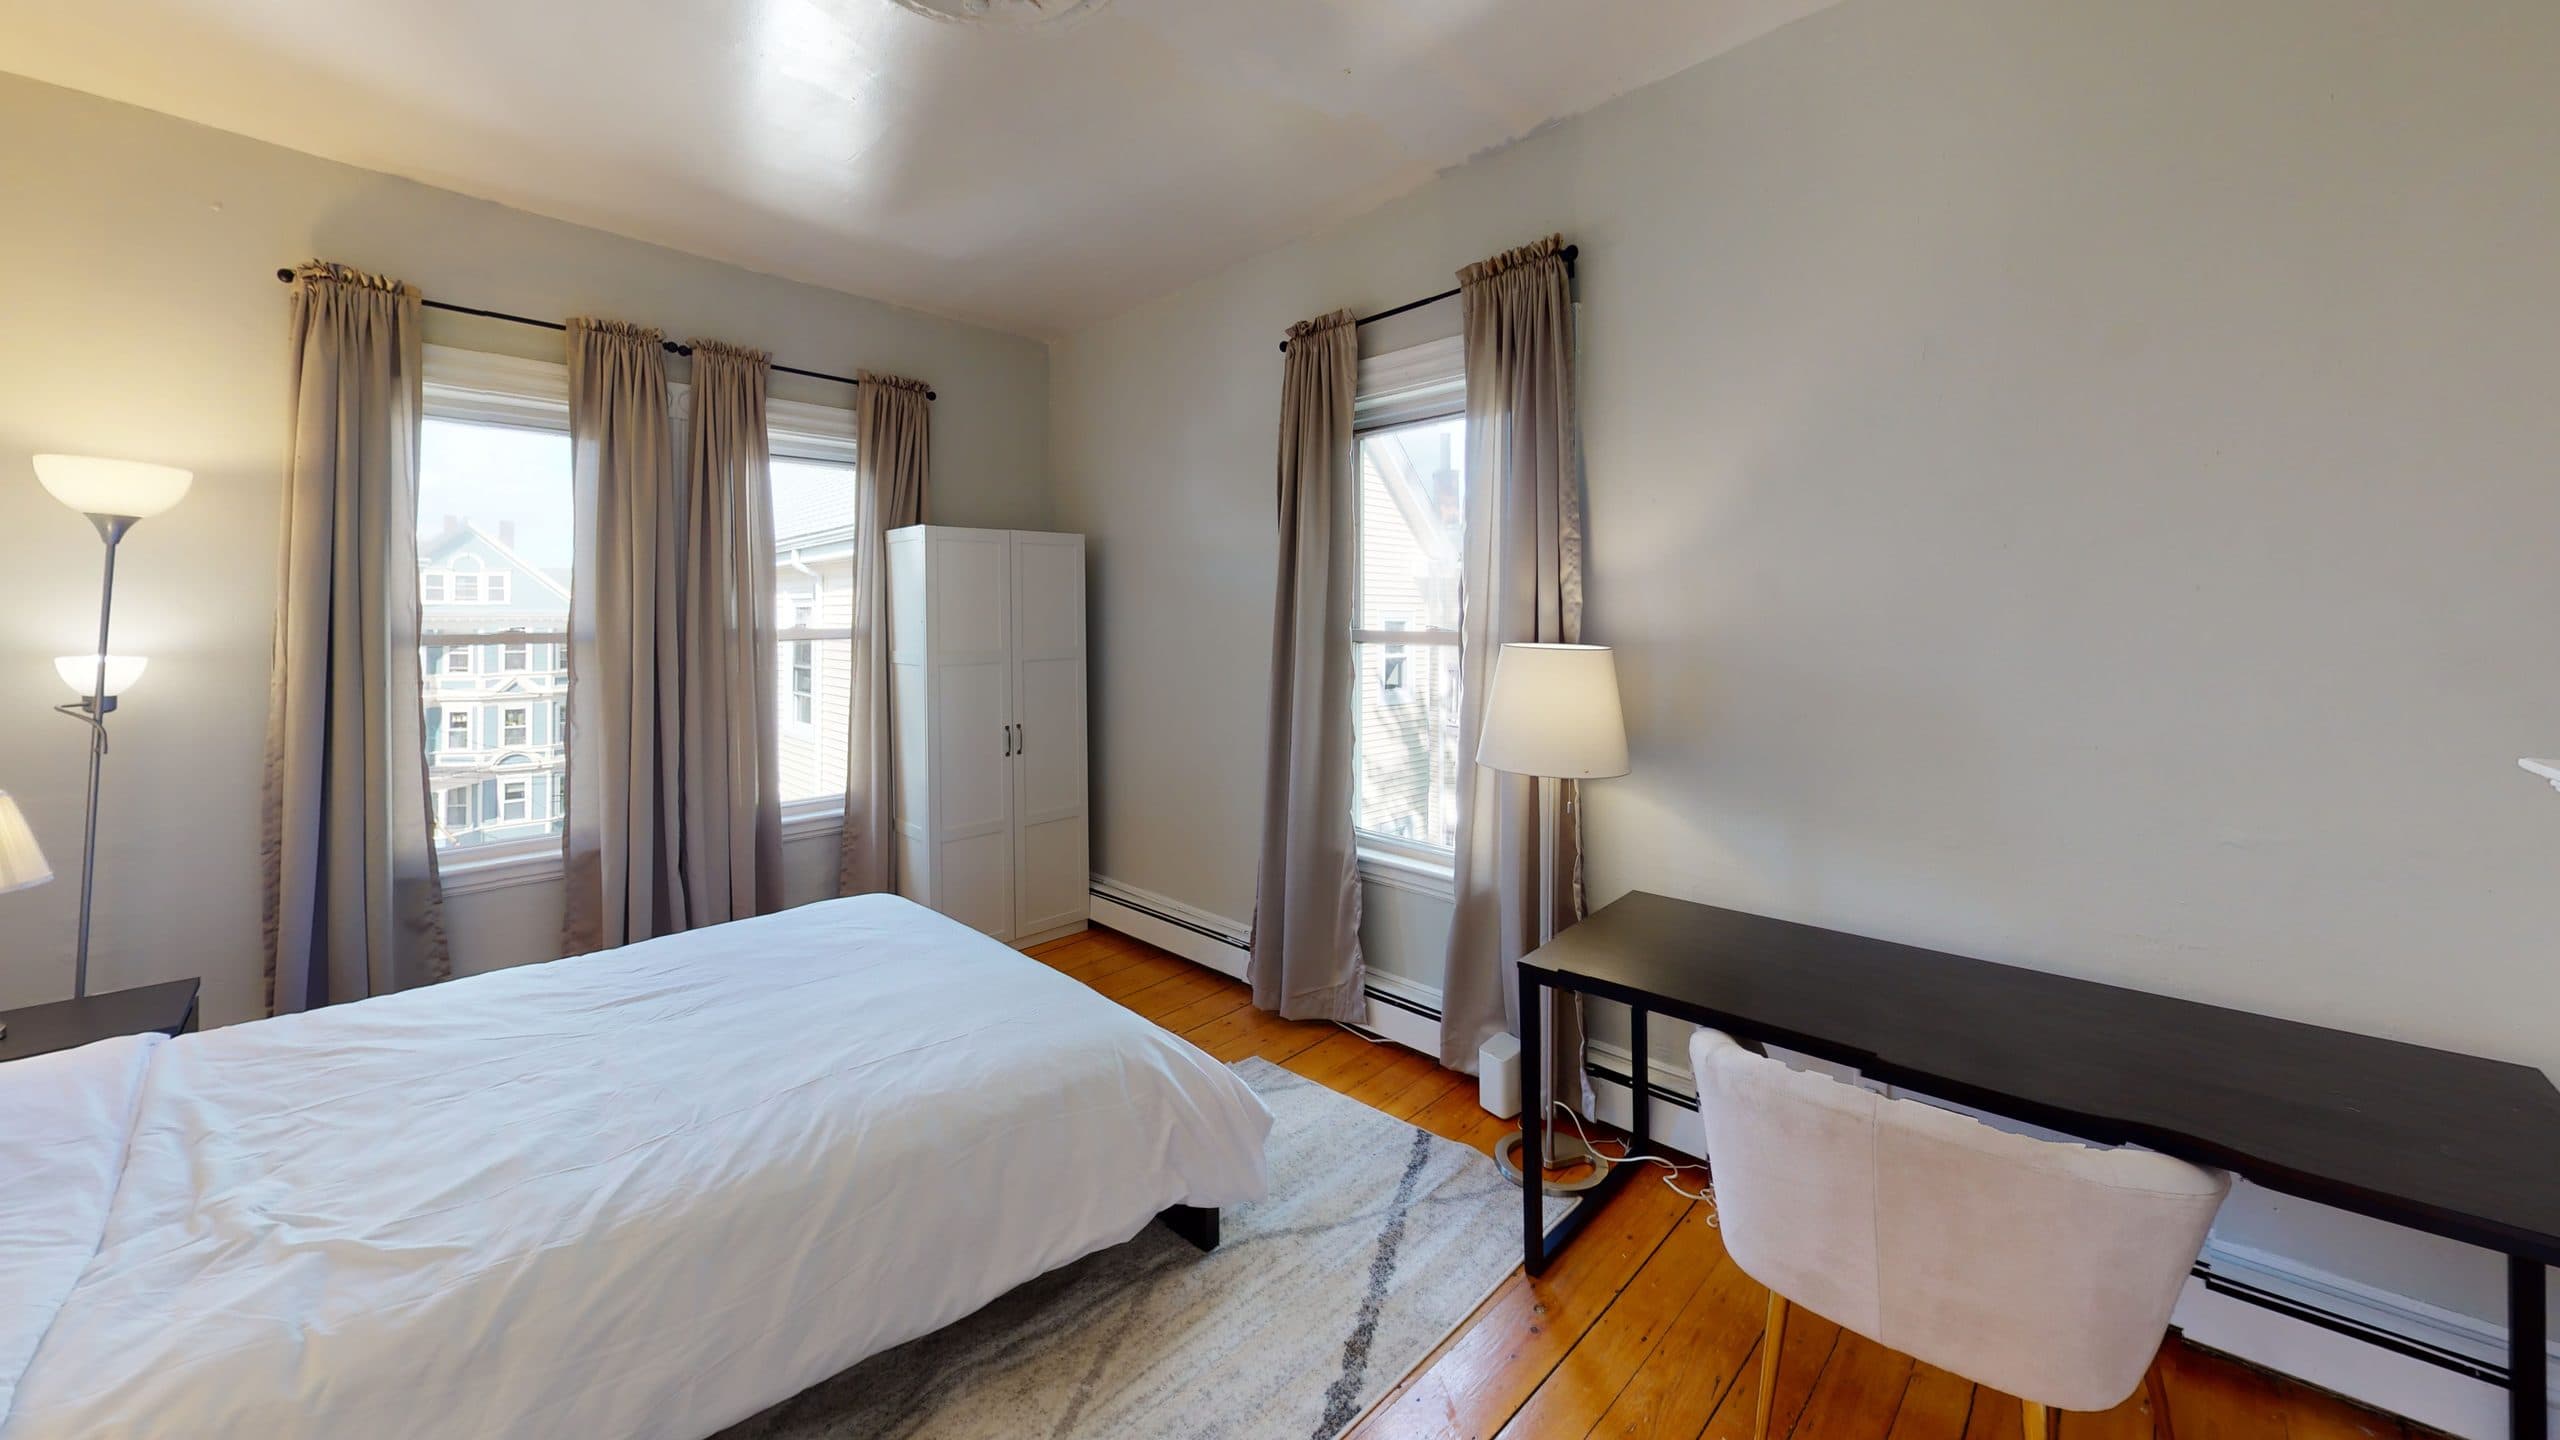 Photo 13 of #1206: Queen Bedroom A at June Homes